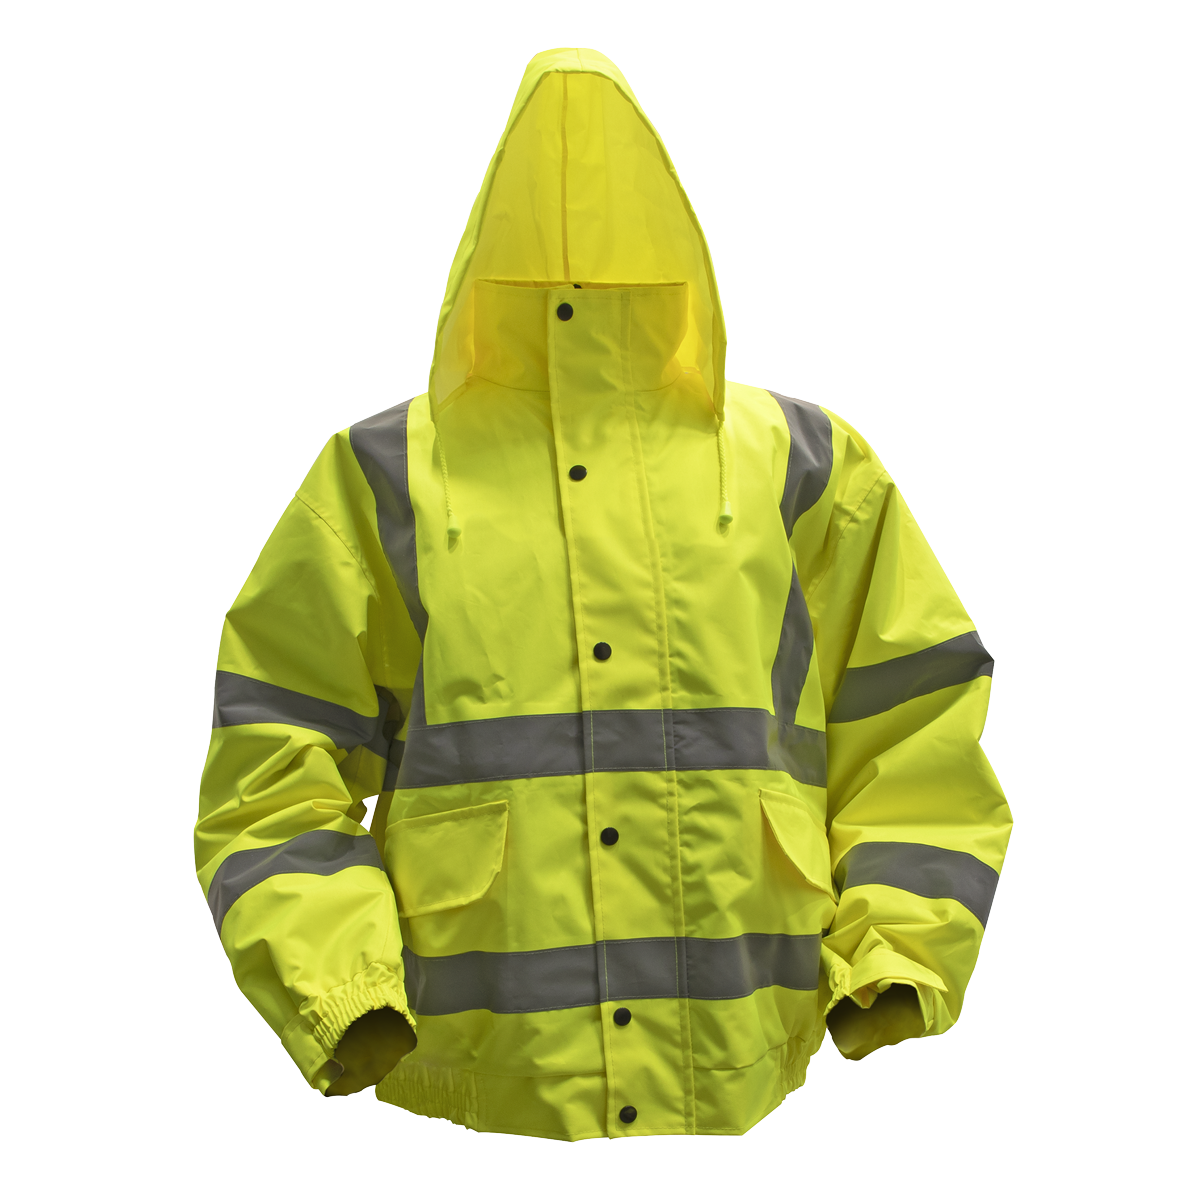 Hi-Vis Yellow Jacket with Quilted Lining & Elasticated Waist - X-Large - 802XL - Farming Parts